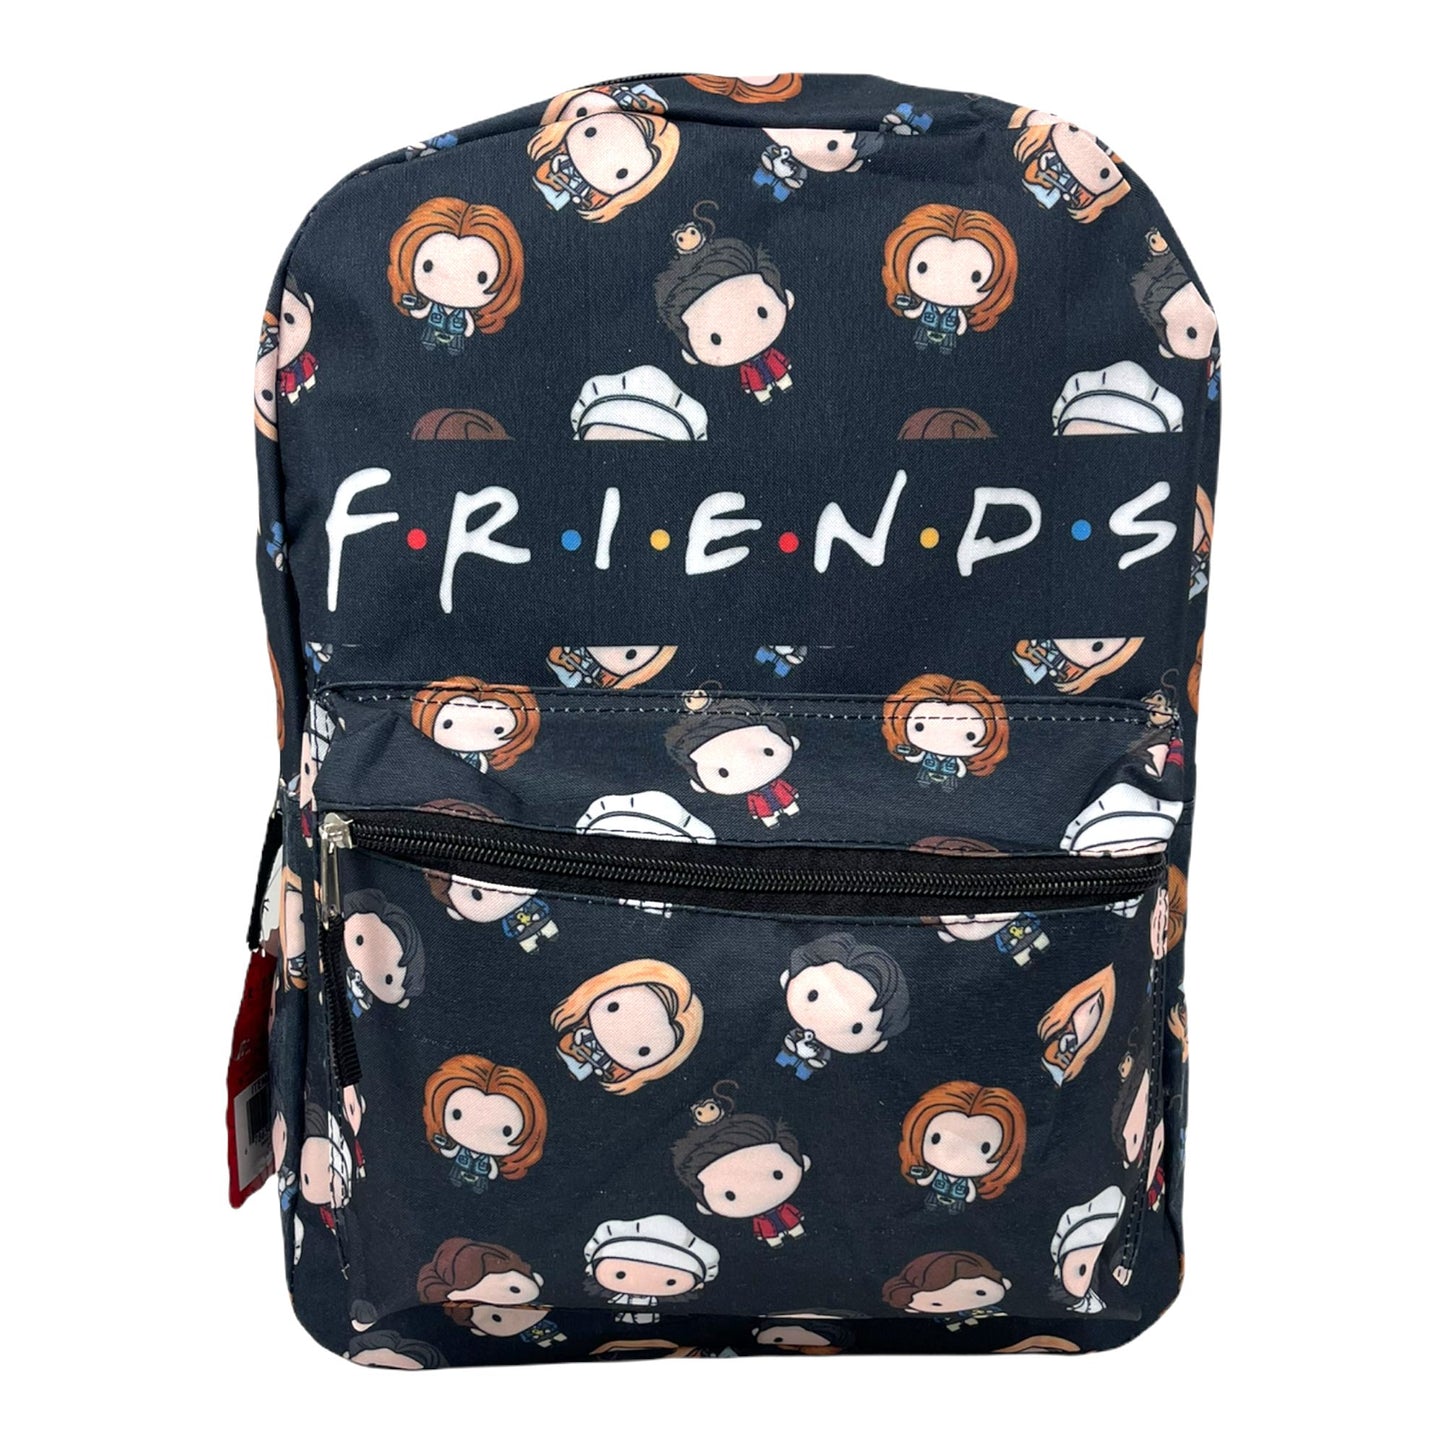 Friends Backpack for Kids, Teens, or Women - Large 16 inch, Black